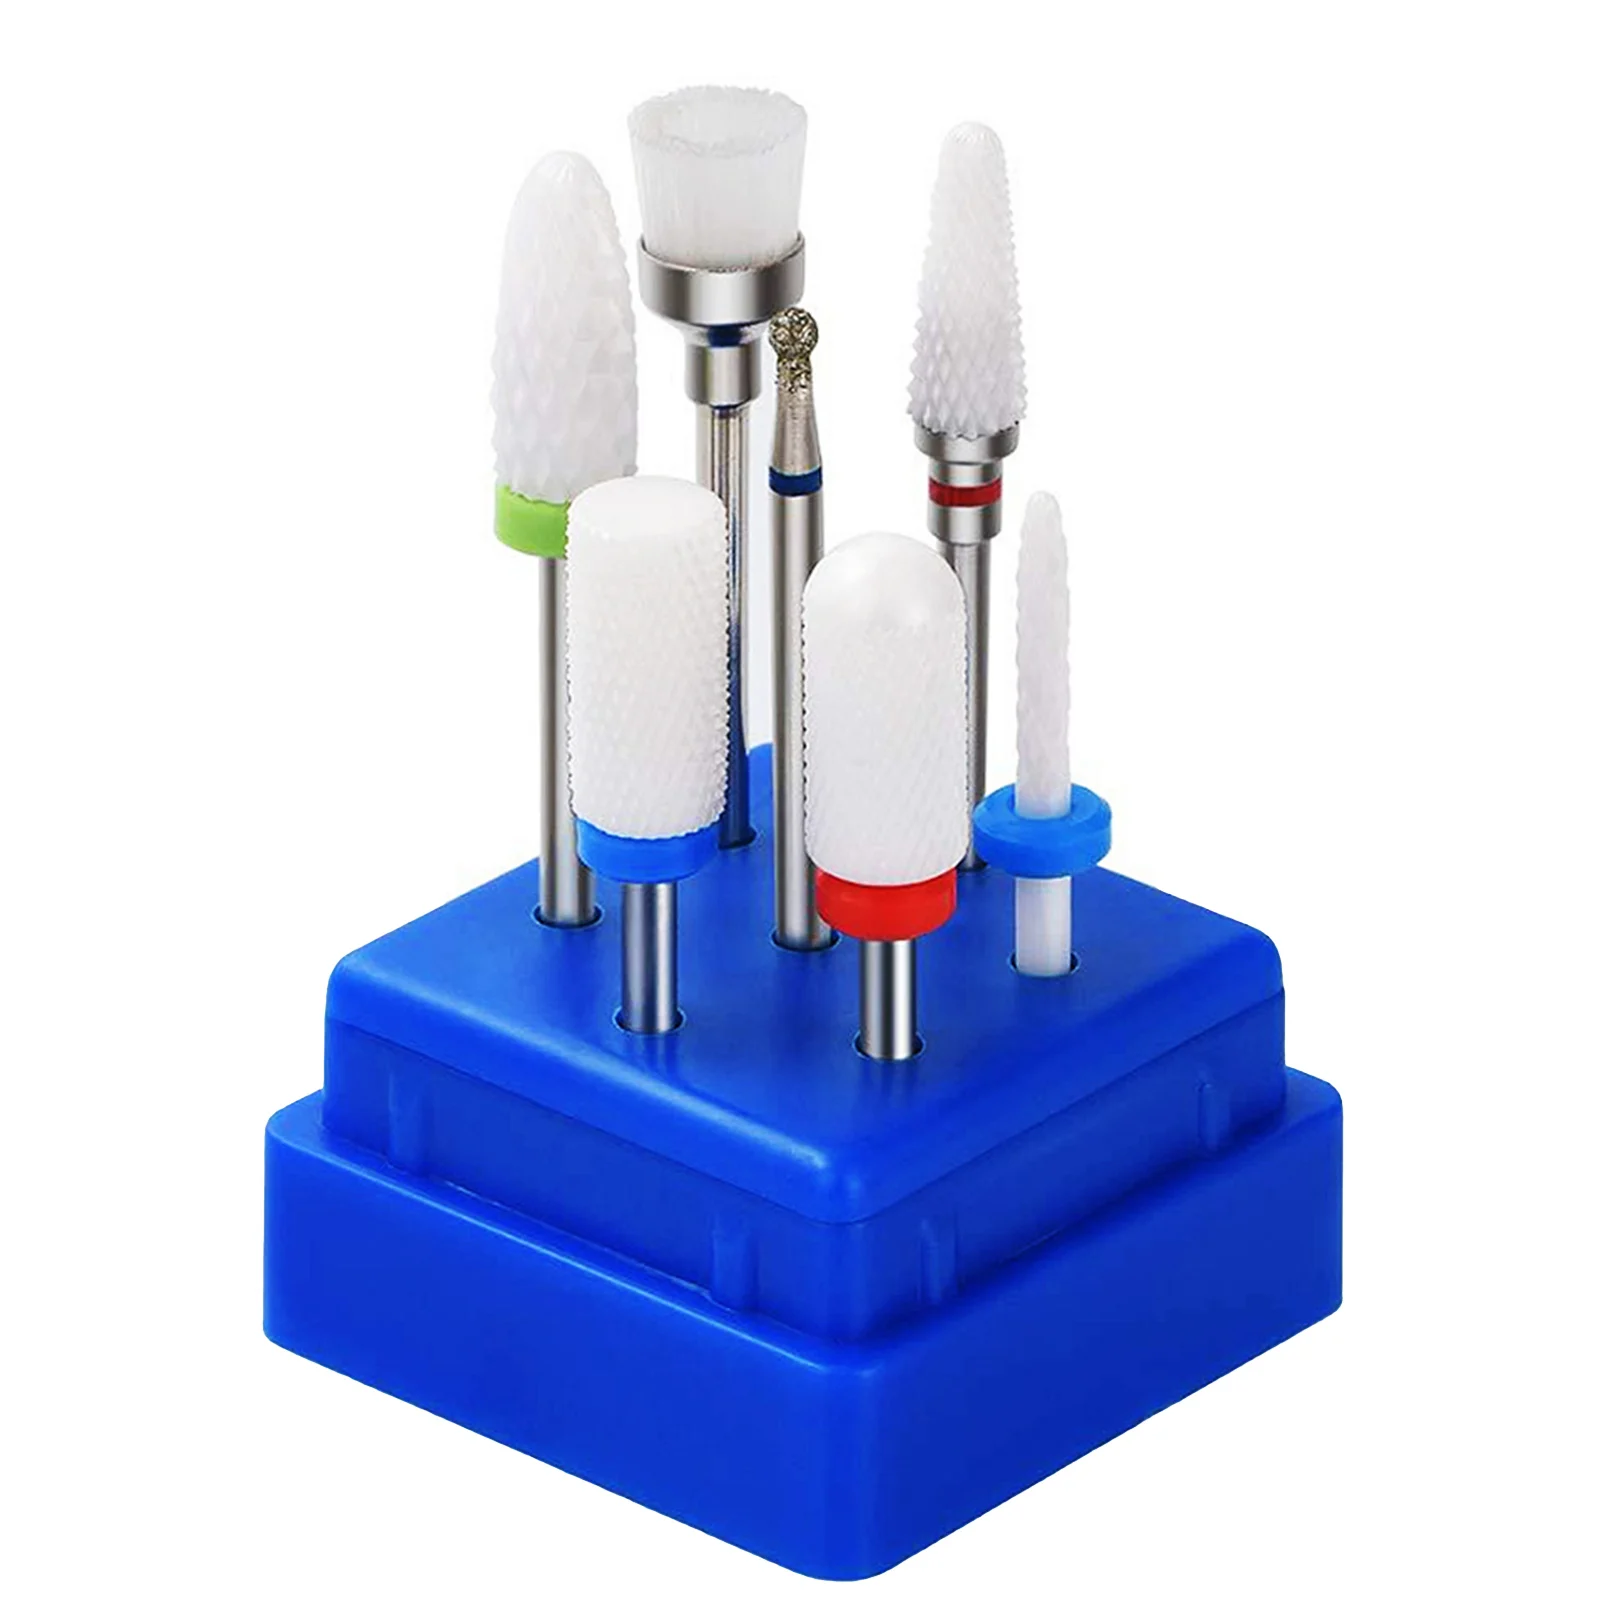 

7pcs Cuticle Gel Removal Ceramic Nail Drill Bit Set With Box Home Use Pedicure Tools Milling Cutter Gift Manicure Easy To Clean